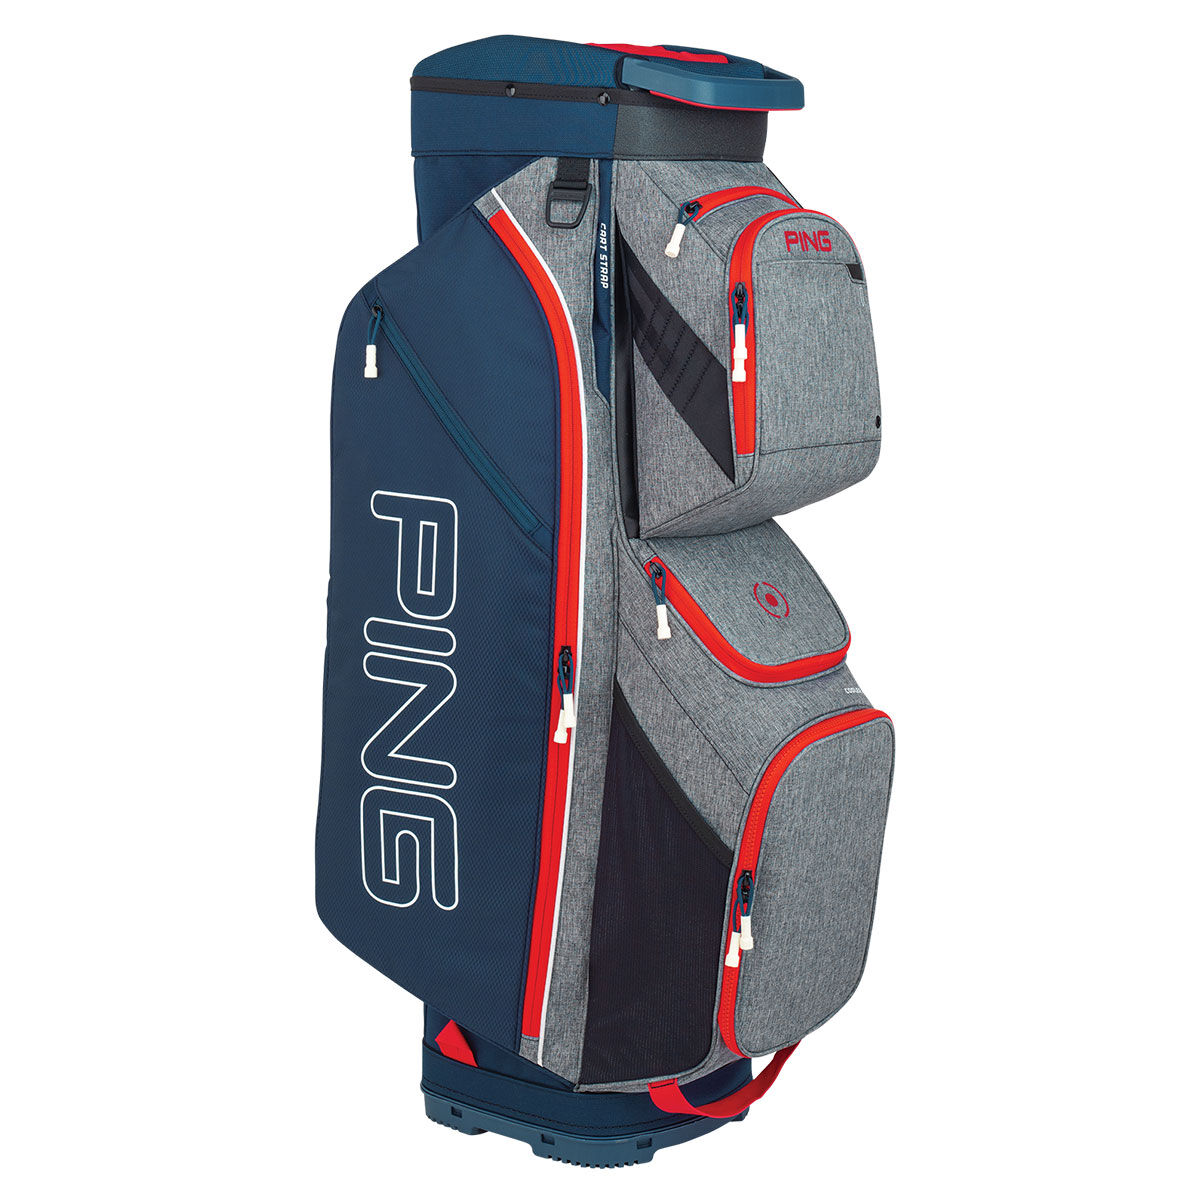 Sac chariot PING Traverse 2021, homme, Heather grey/navy/scarlet | Online Golf